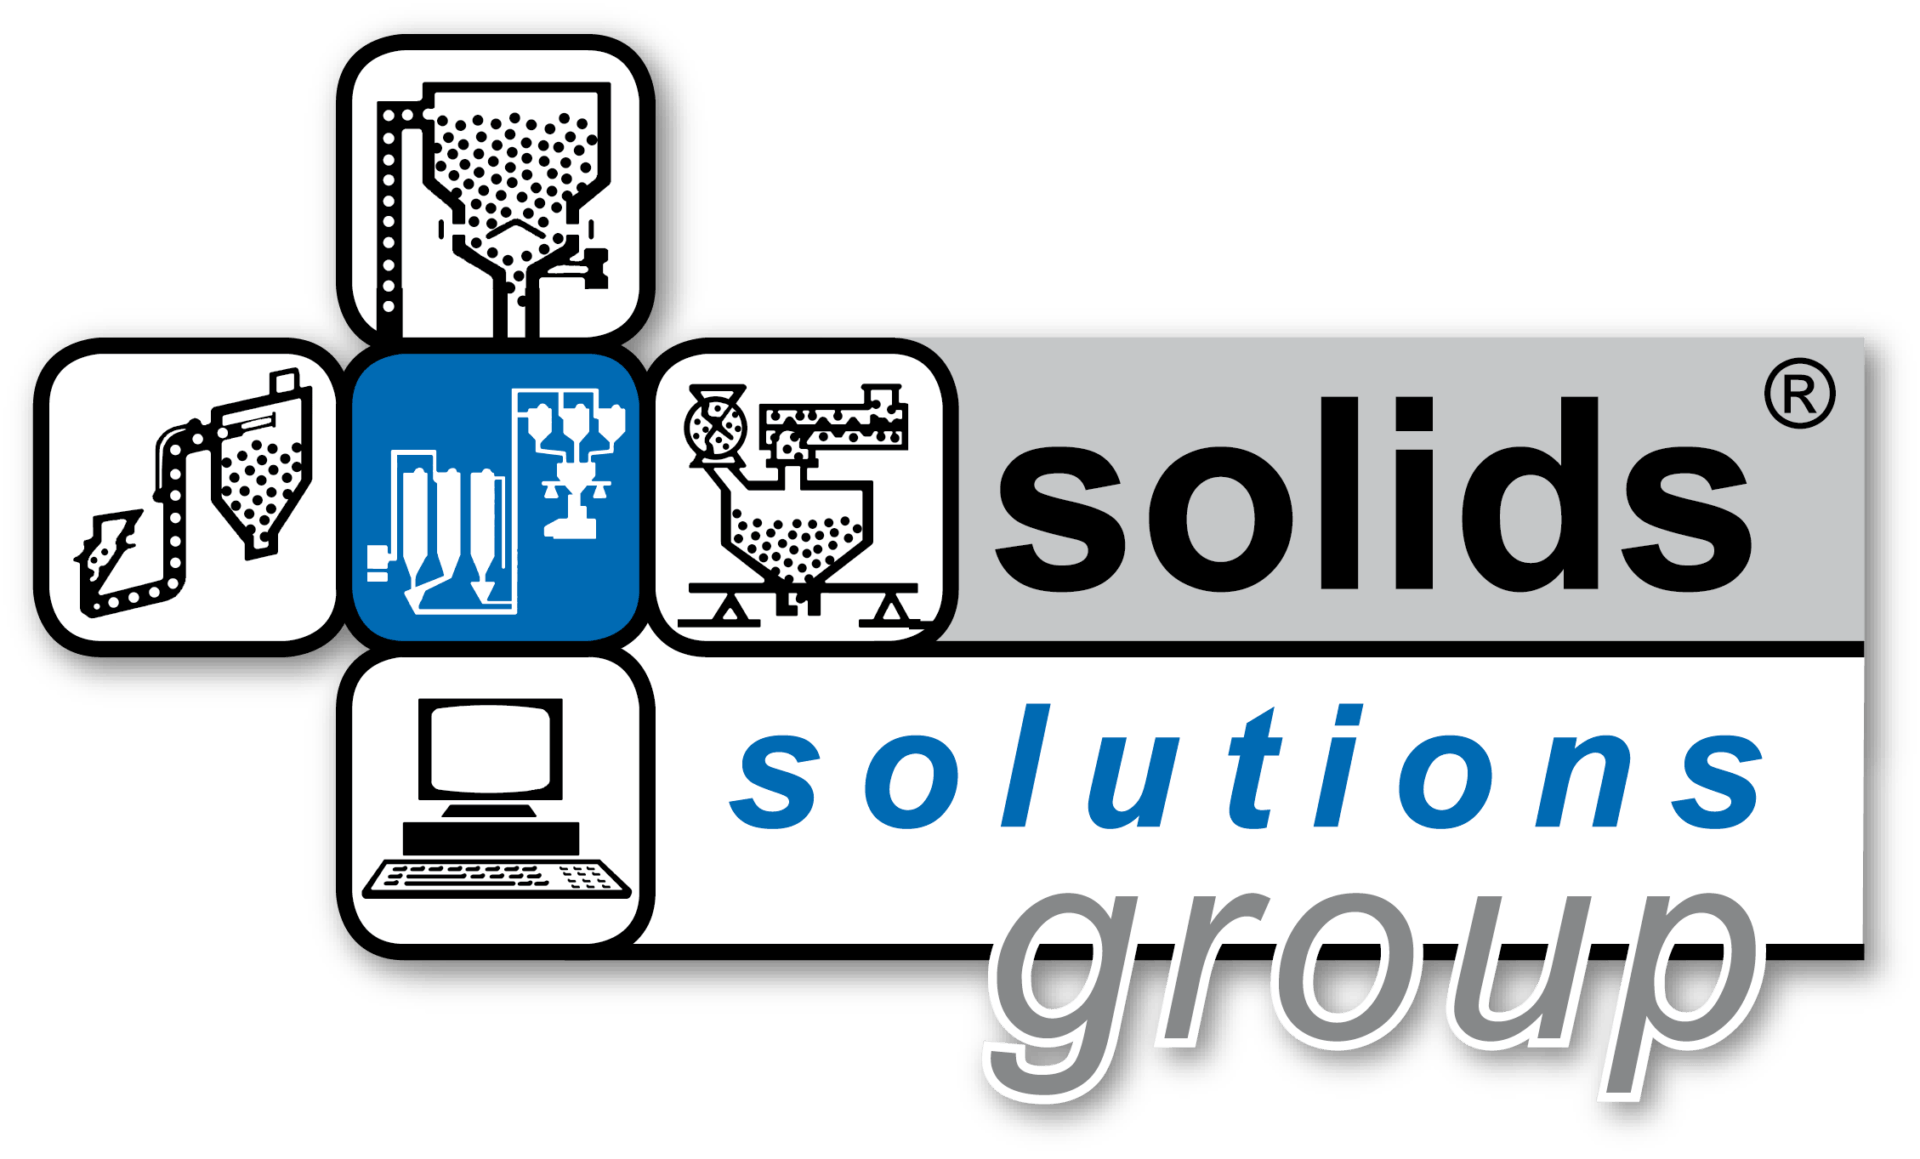 SOLIDS SOLUTIONS GROUP BV